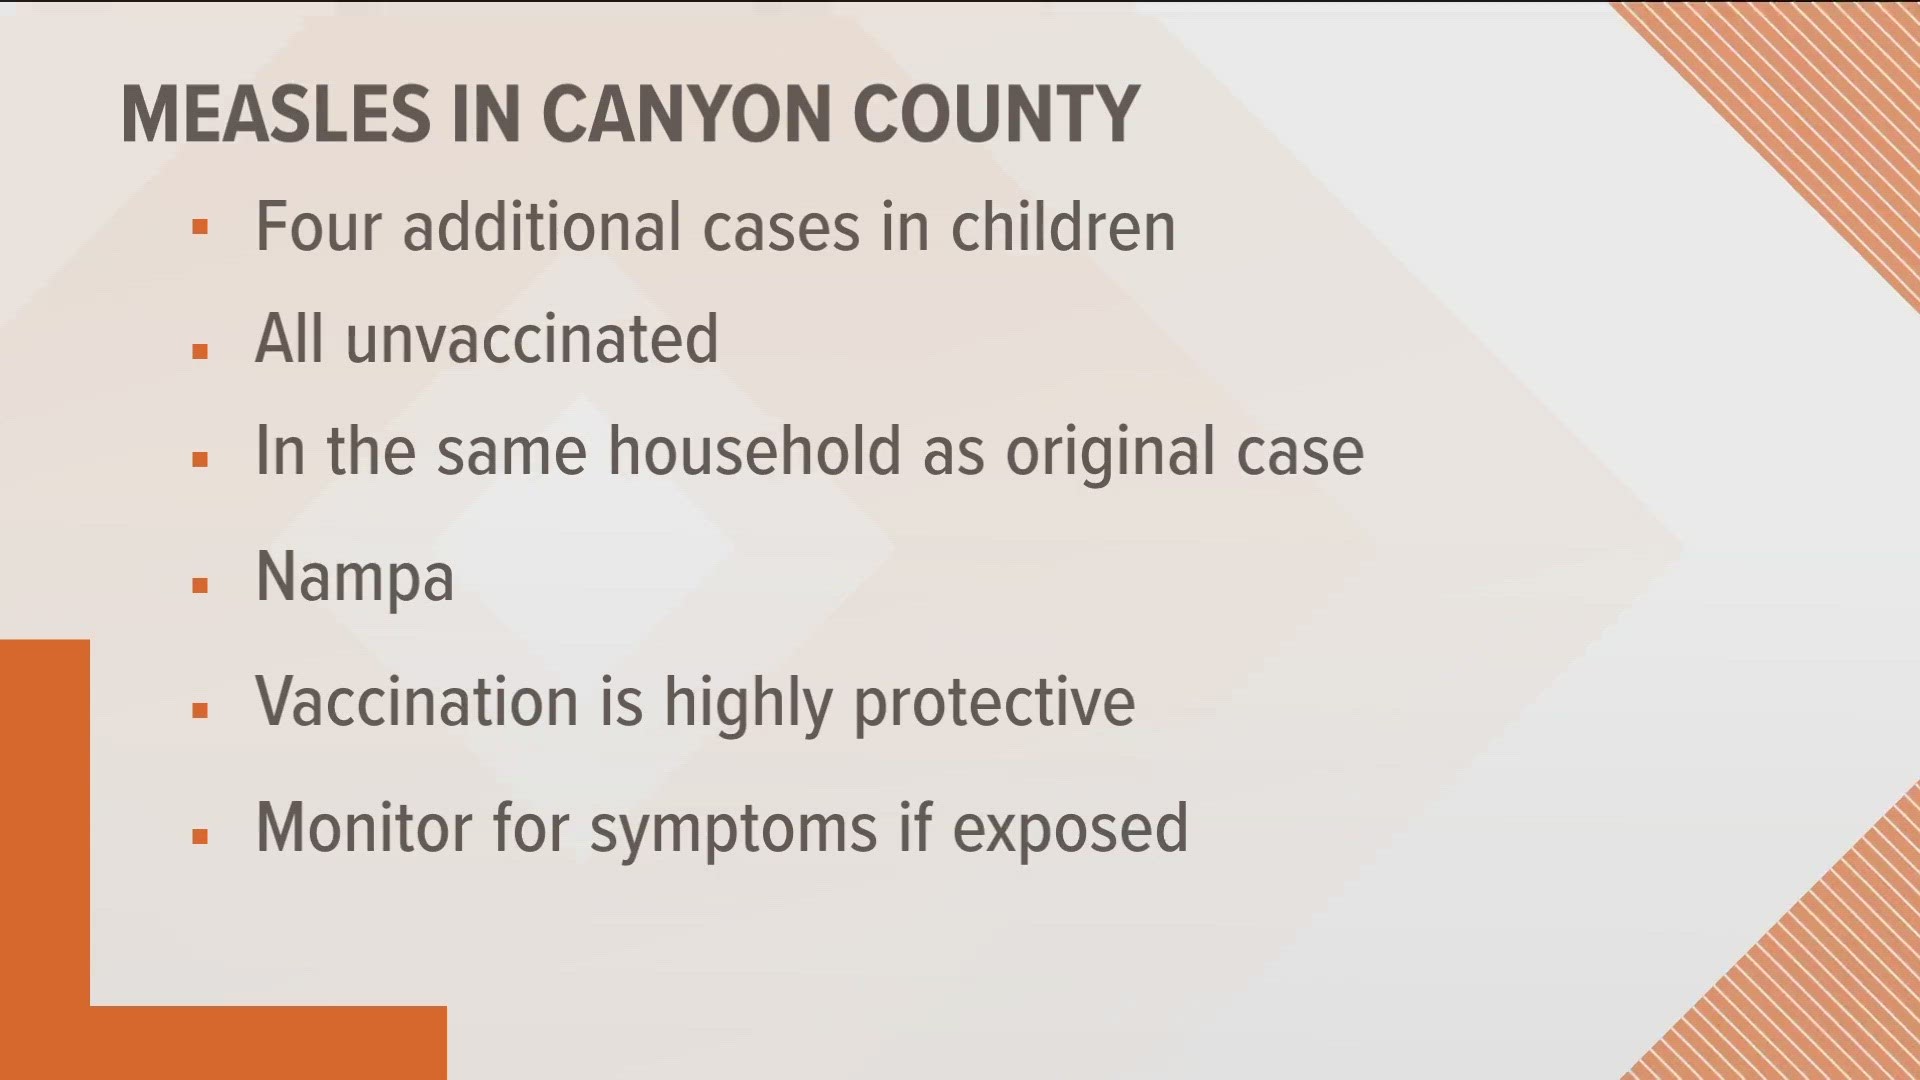 Officials said all four cases are unvaccinated children that were exposed in a household with another infected person who had their case confirmed by IDHW Sept. 10.